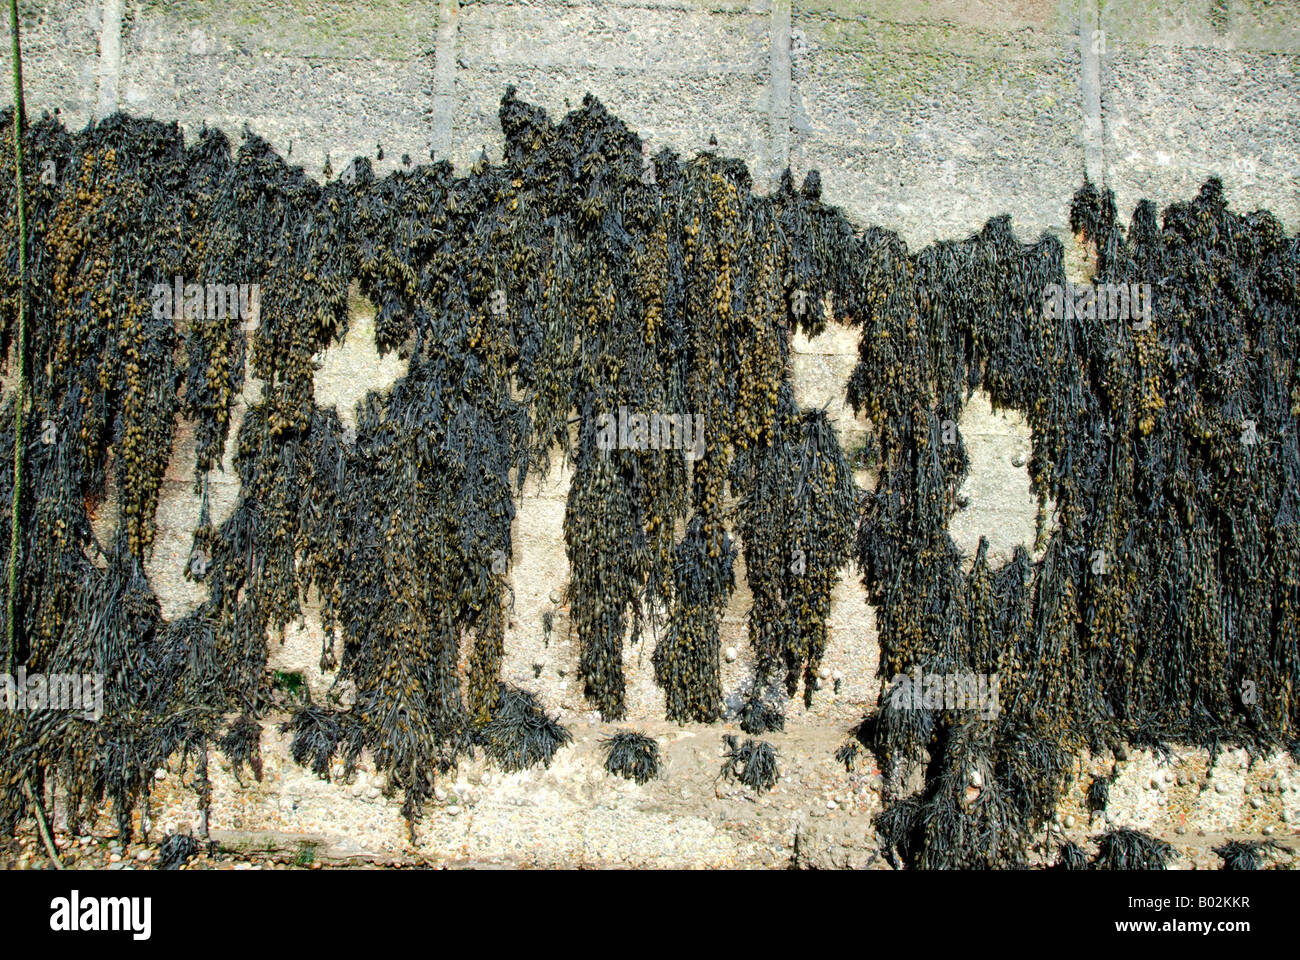 Seaweed growing on a harbour wall. Stock Photo